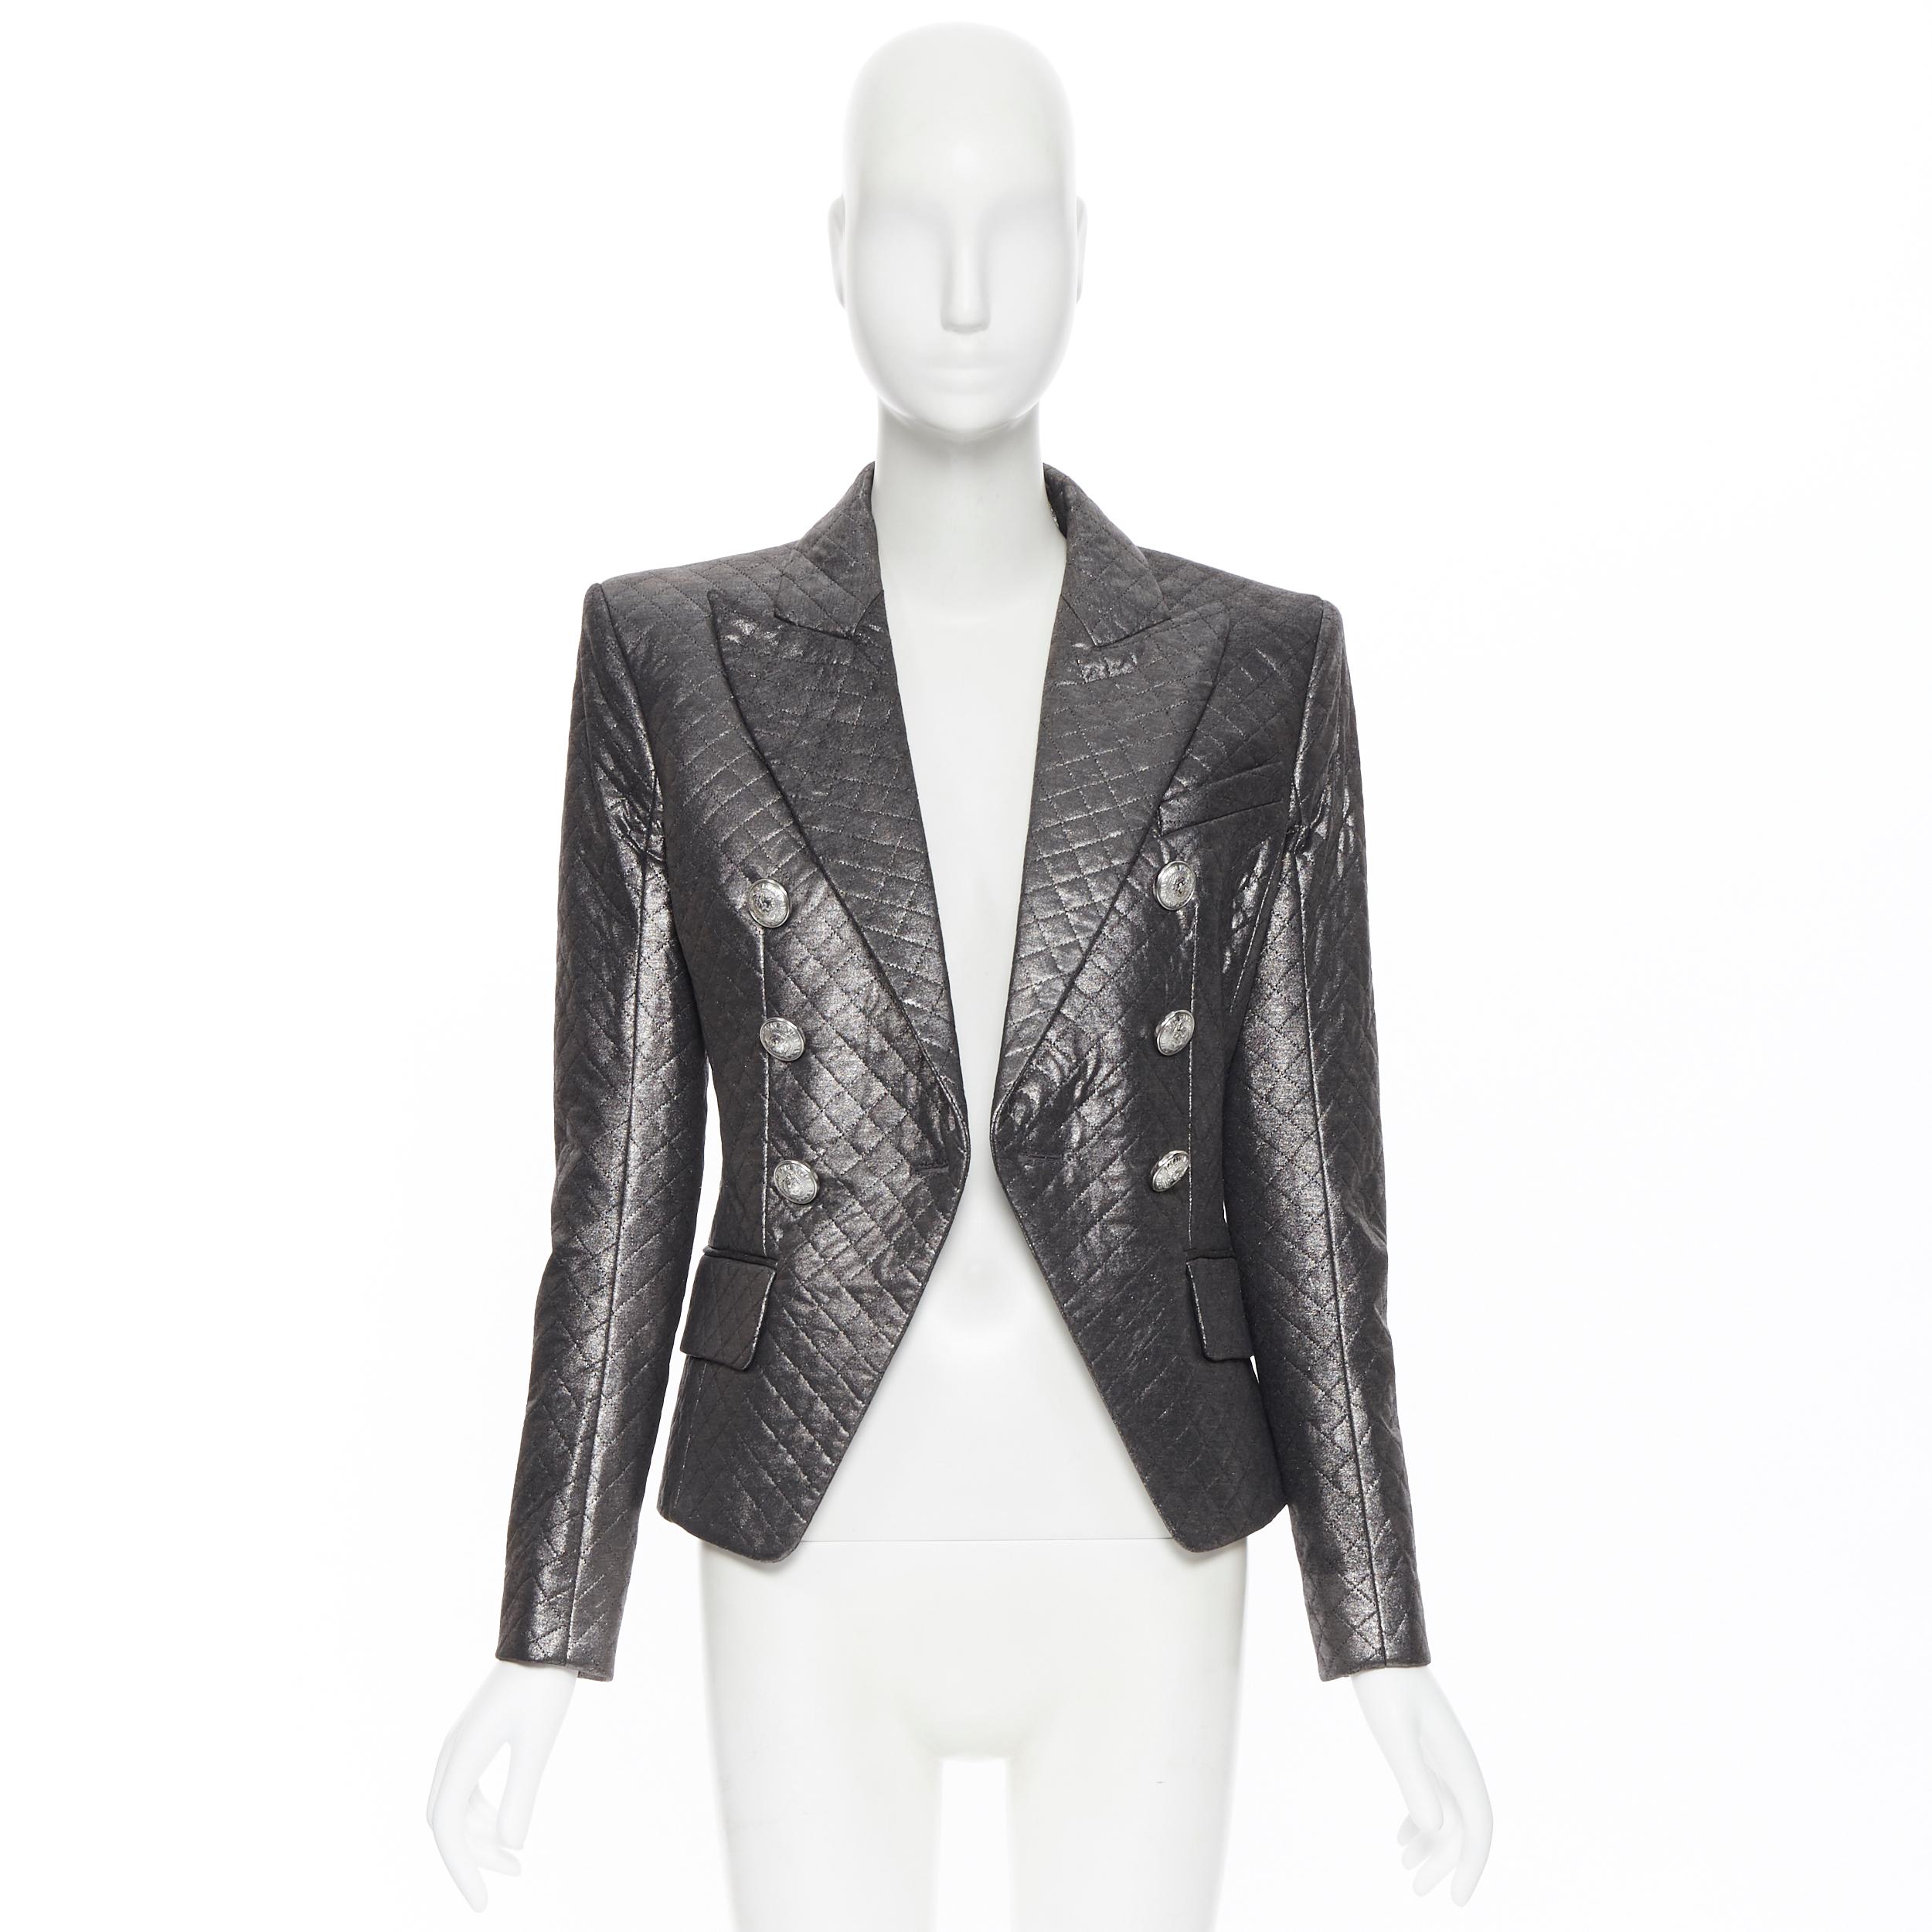 new BALMAIN gunmetal silver quilted military double breasted blazer jacket FR36
Brand: Balmain
Designer: Olivier Rousteing
Model Name / Style: Double breasted jacket
Material: Viscose
Color: Silver
Pattern: Solid
Closure: Button
Extra Detail: A